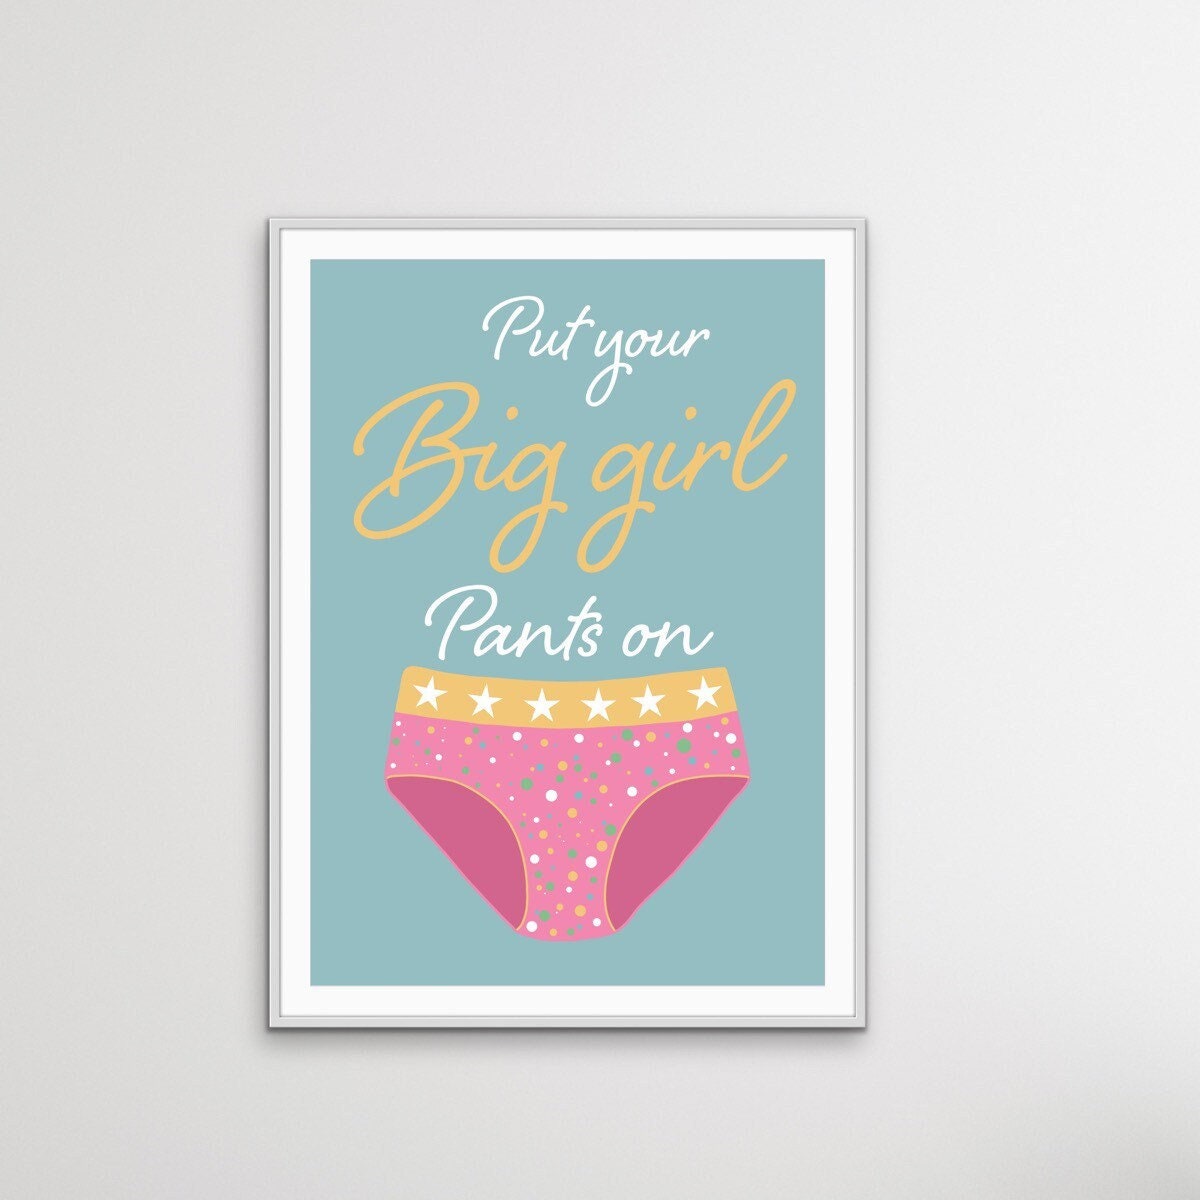 BIG GIRL PANTIES DEAL WITH IT POSTER - 24x36 - ART ADVERTISING New/Rolled!